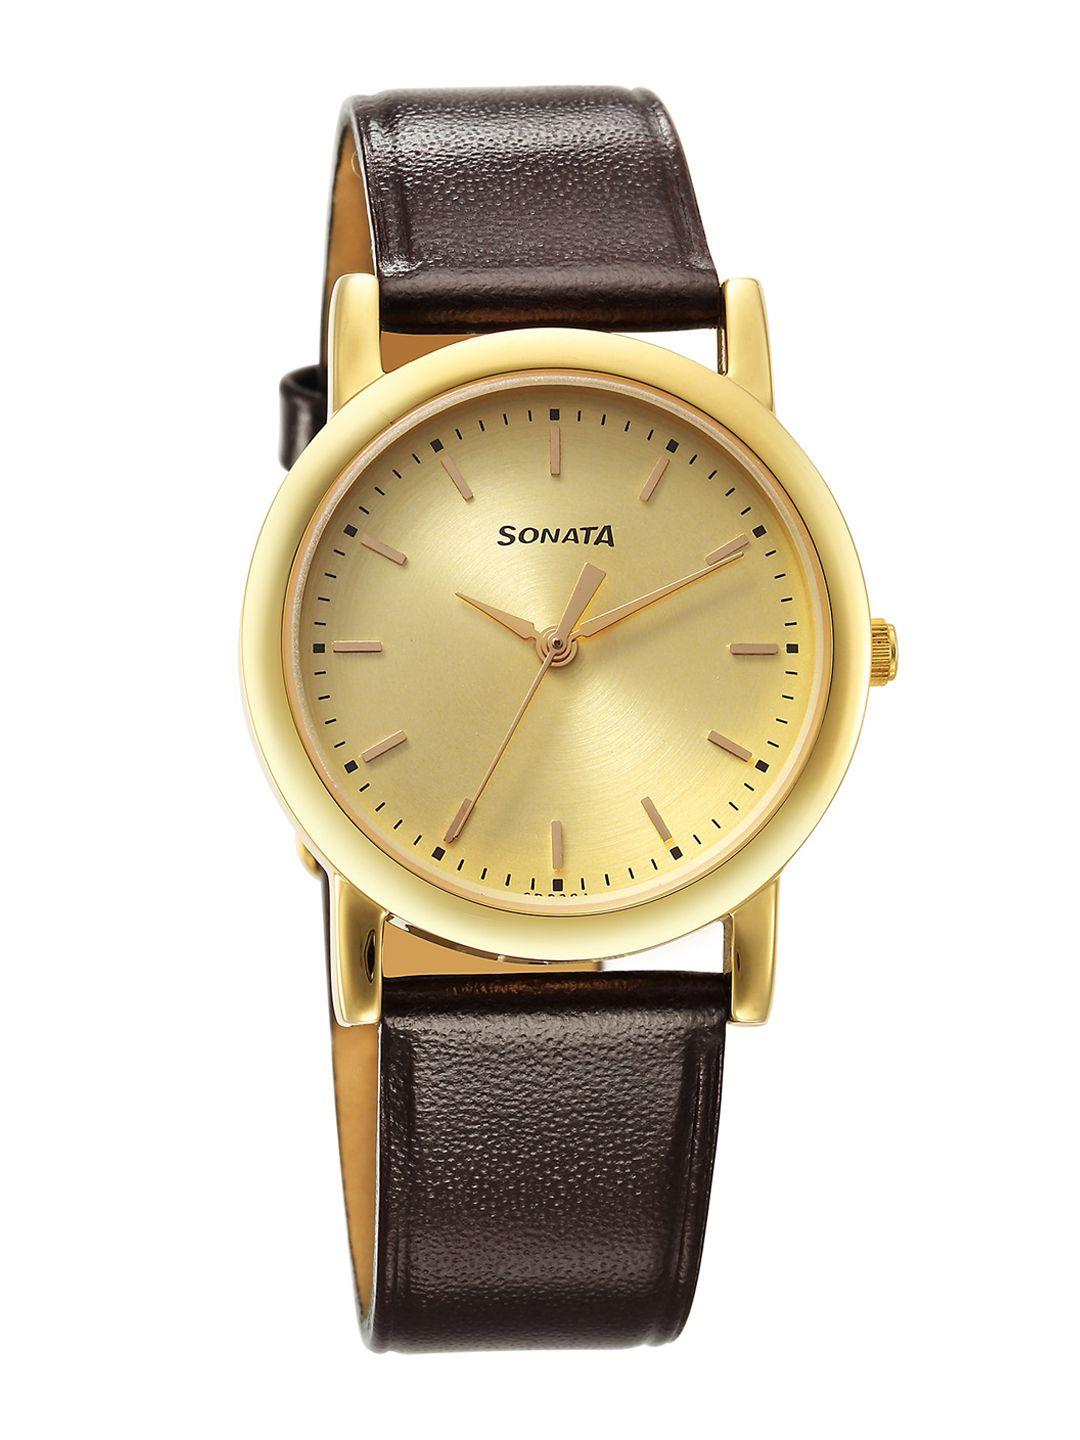 sonata-classique-collection-men-leather-straps-analogue-watch-7987yl09w